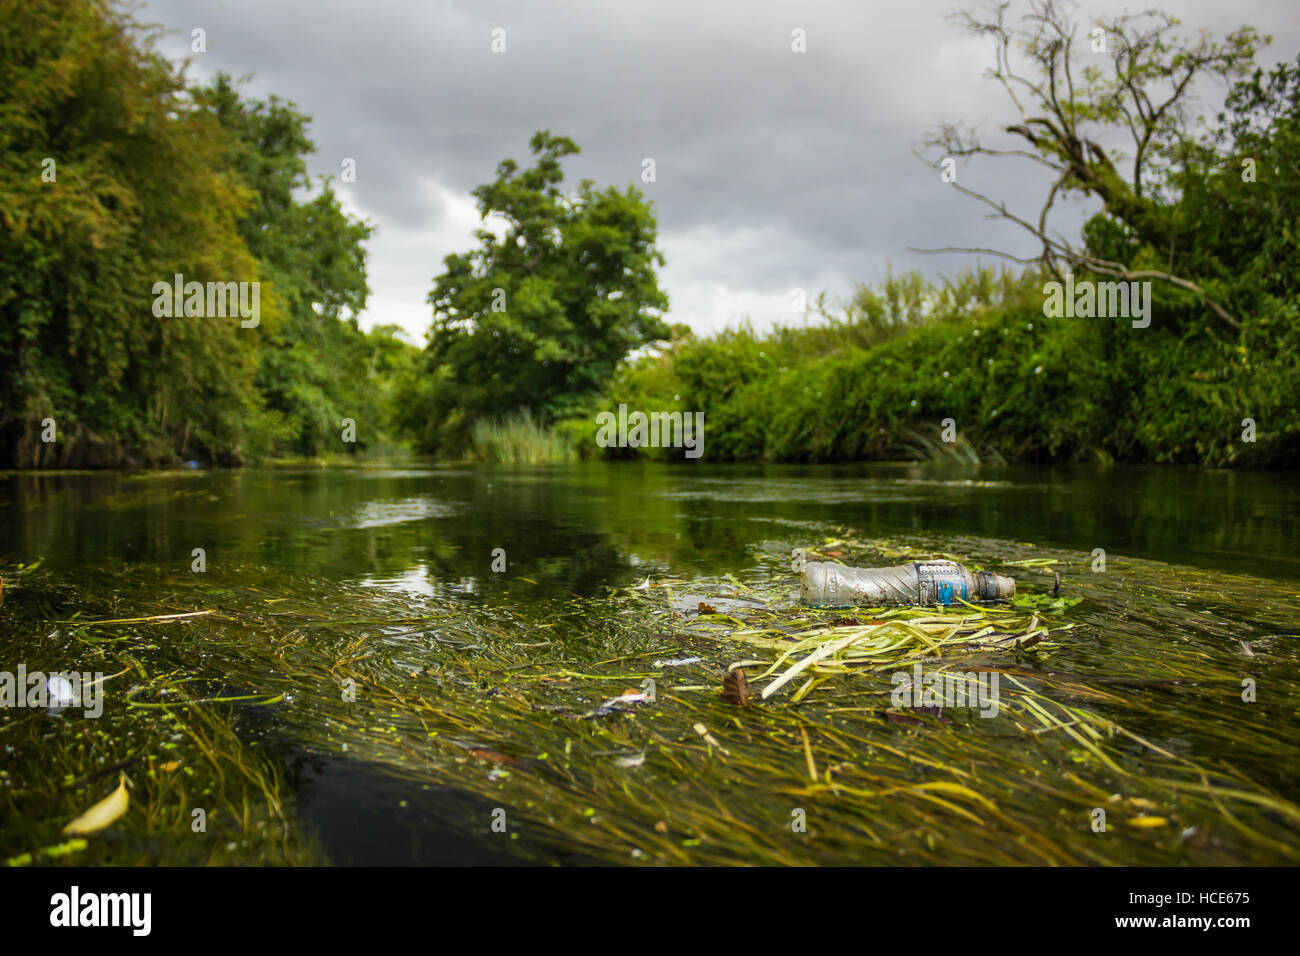 A plastic bottle caught up in the vegetation of the river Anker, Tamworth, Staffordshire, August 2014 Stock Photo